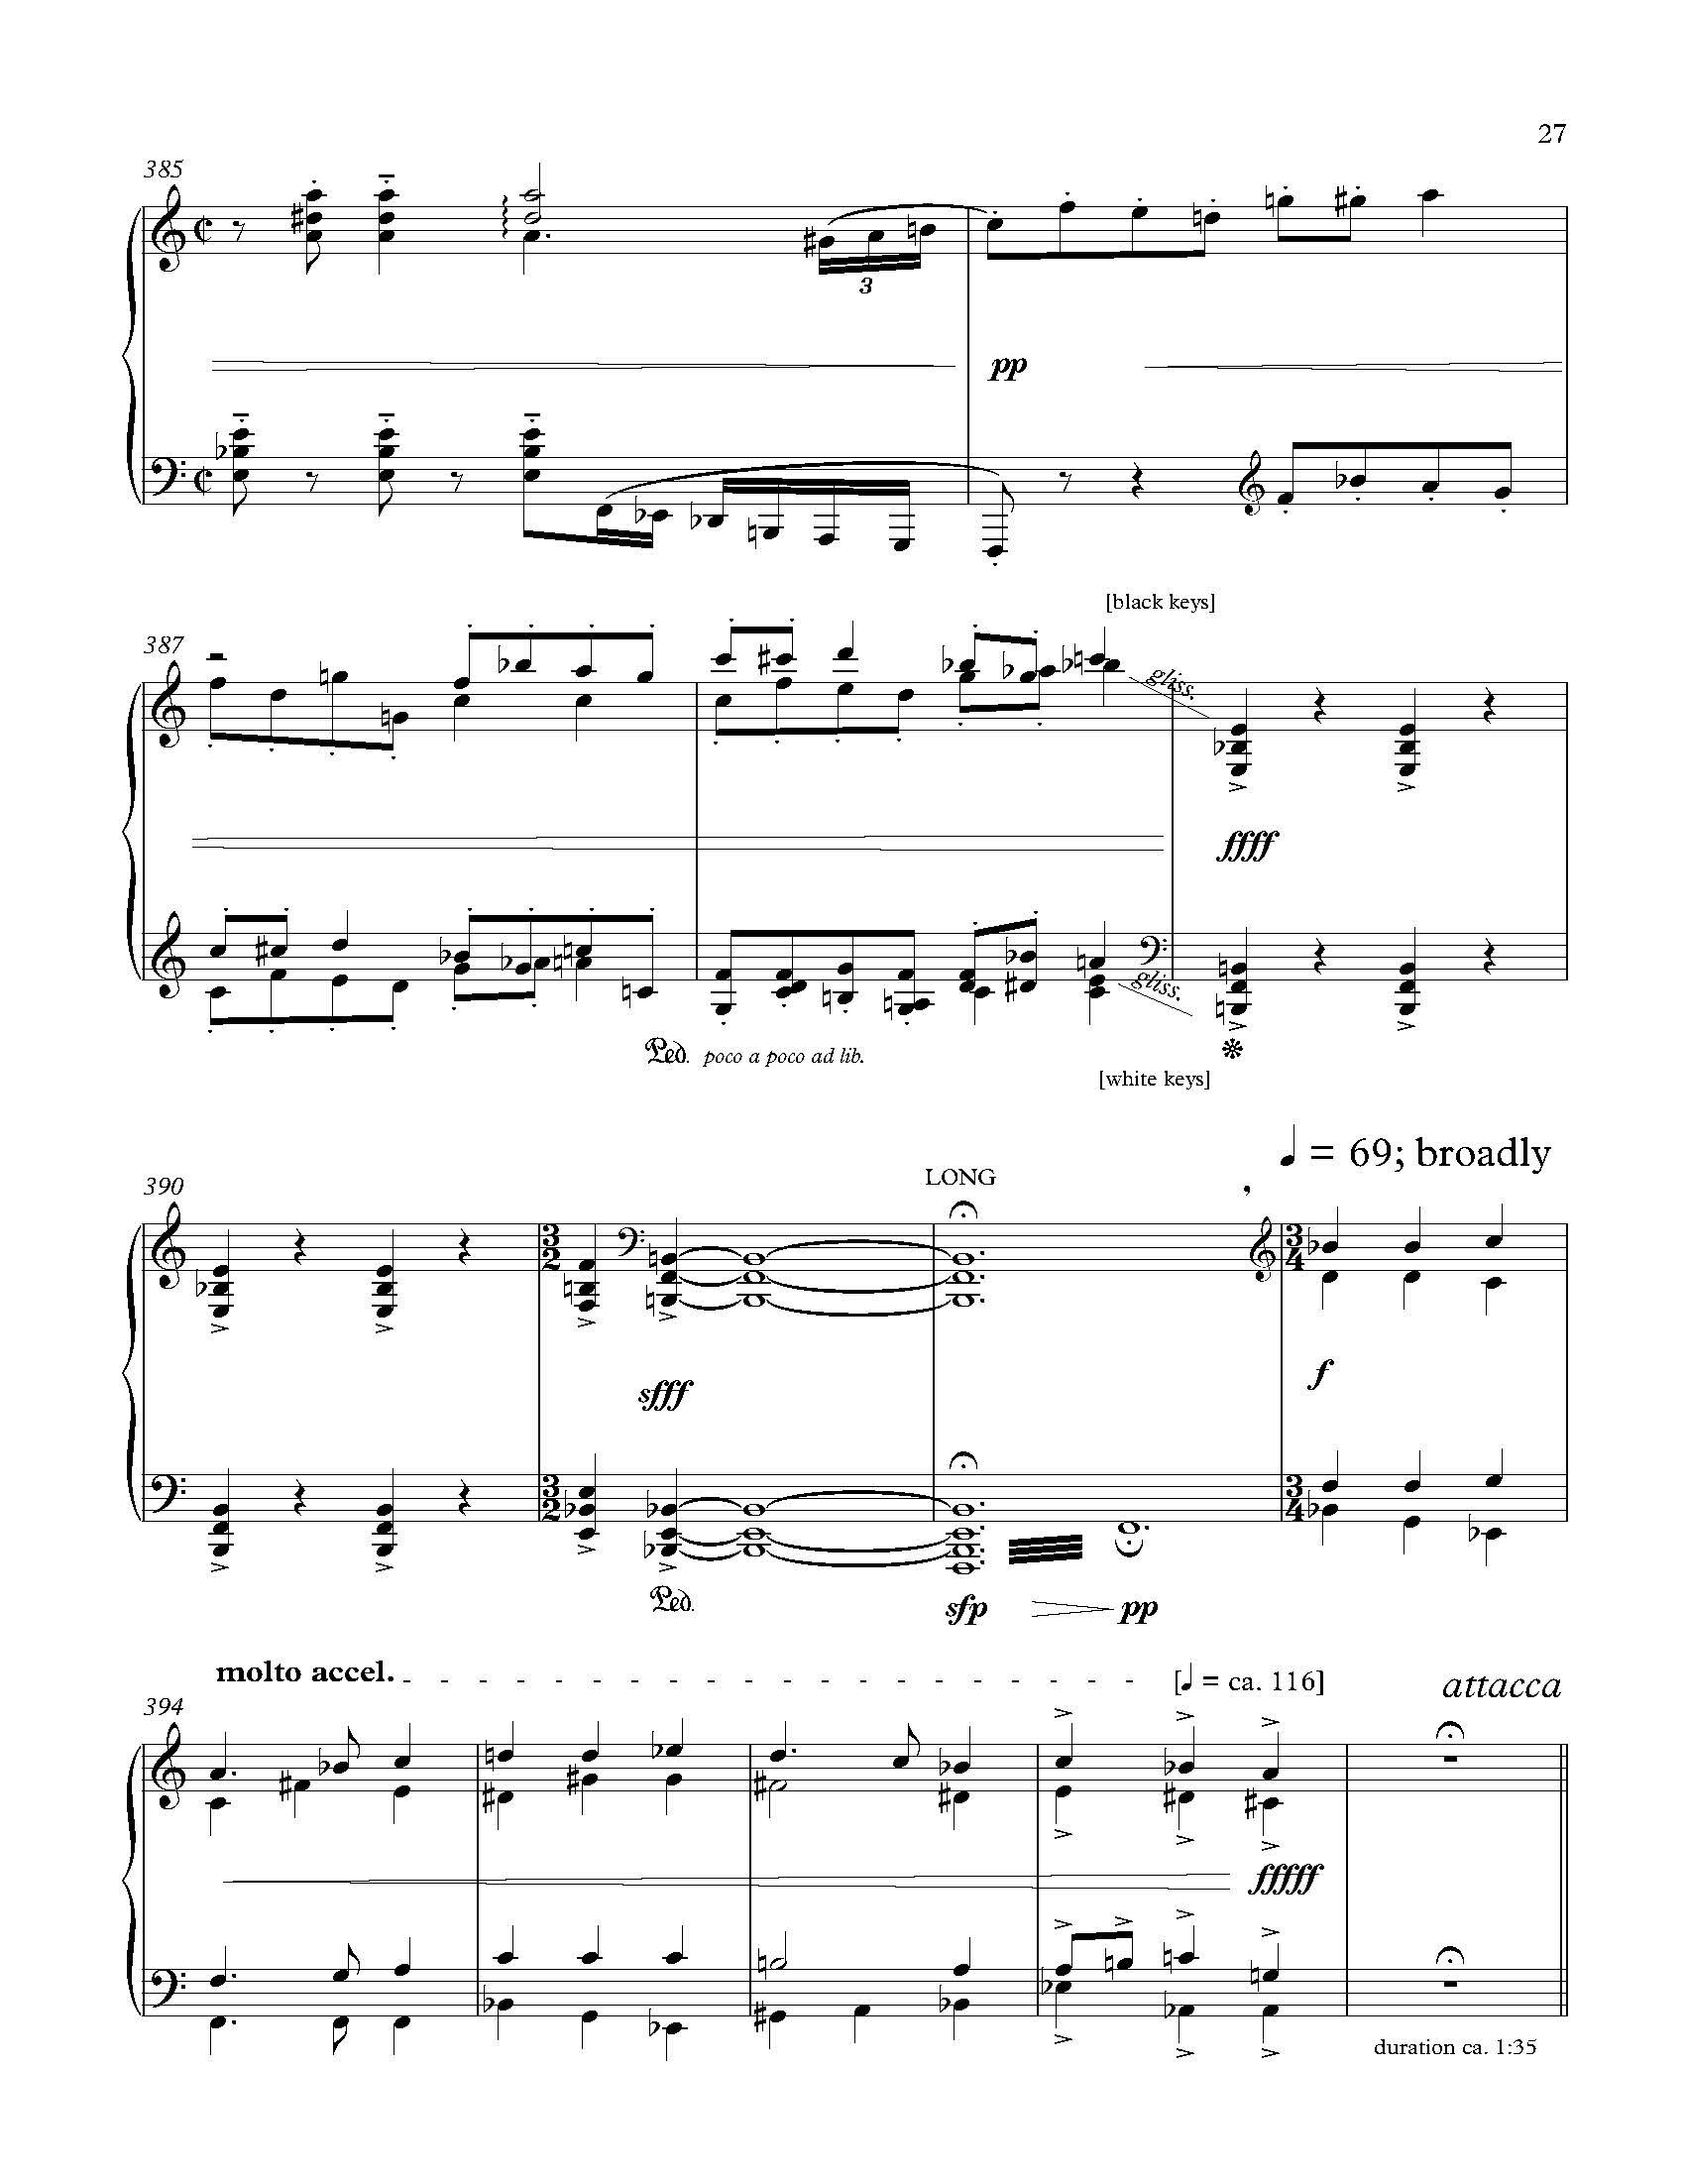 Wilfred Owen at the Gates - Complete Score_Page_33.jpg